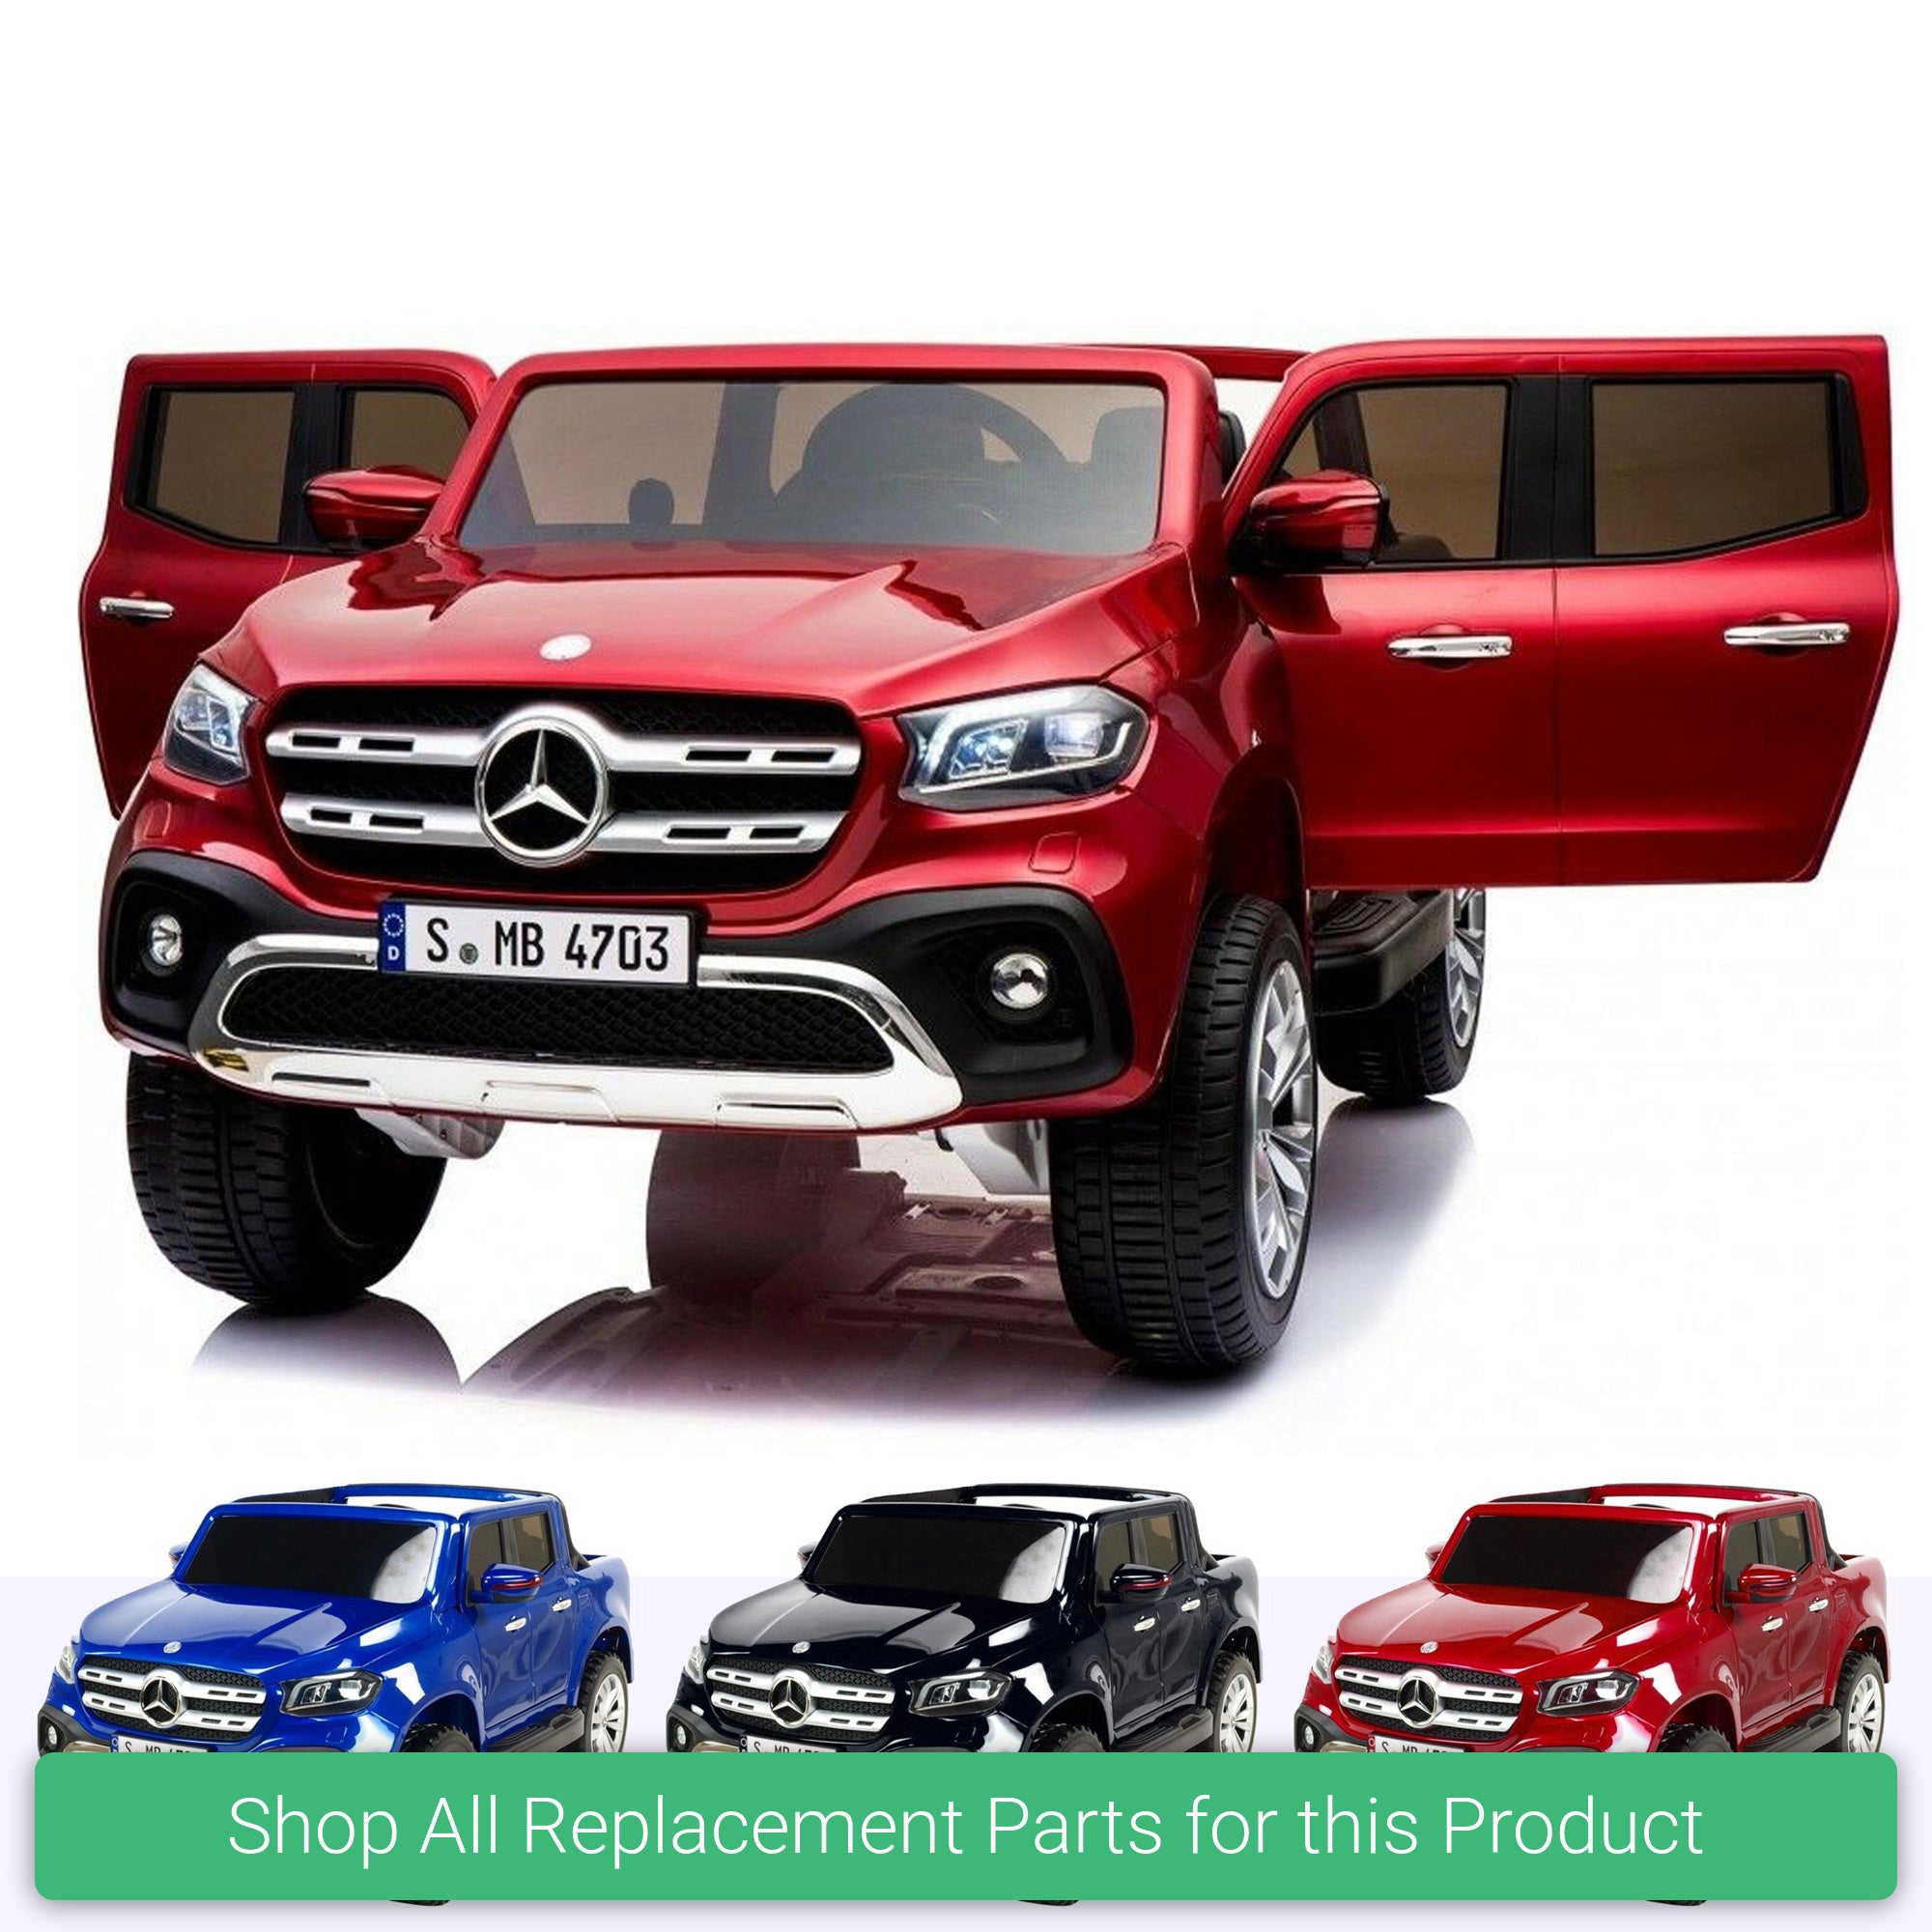 Replacement Parts and Spares for Kids Mercedes Benz X Class - Merc-XC-2019 - XMX-606